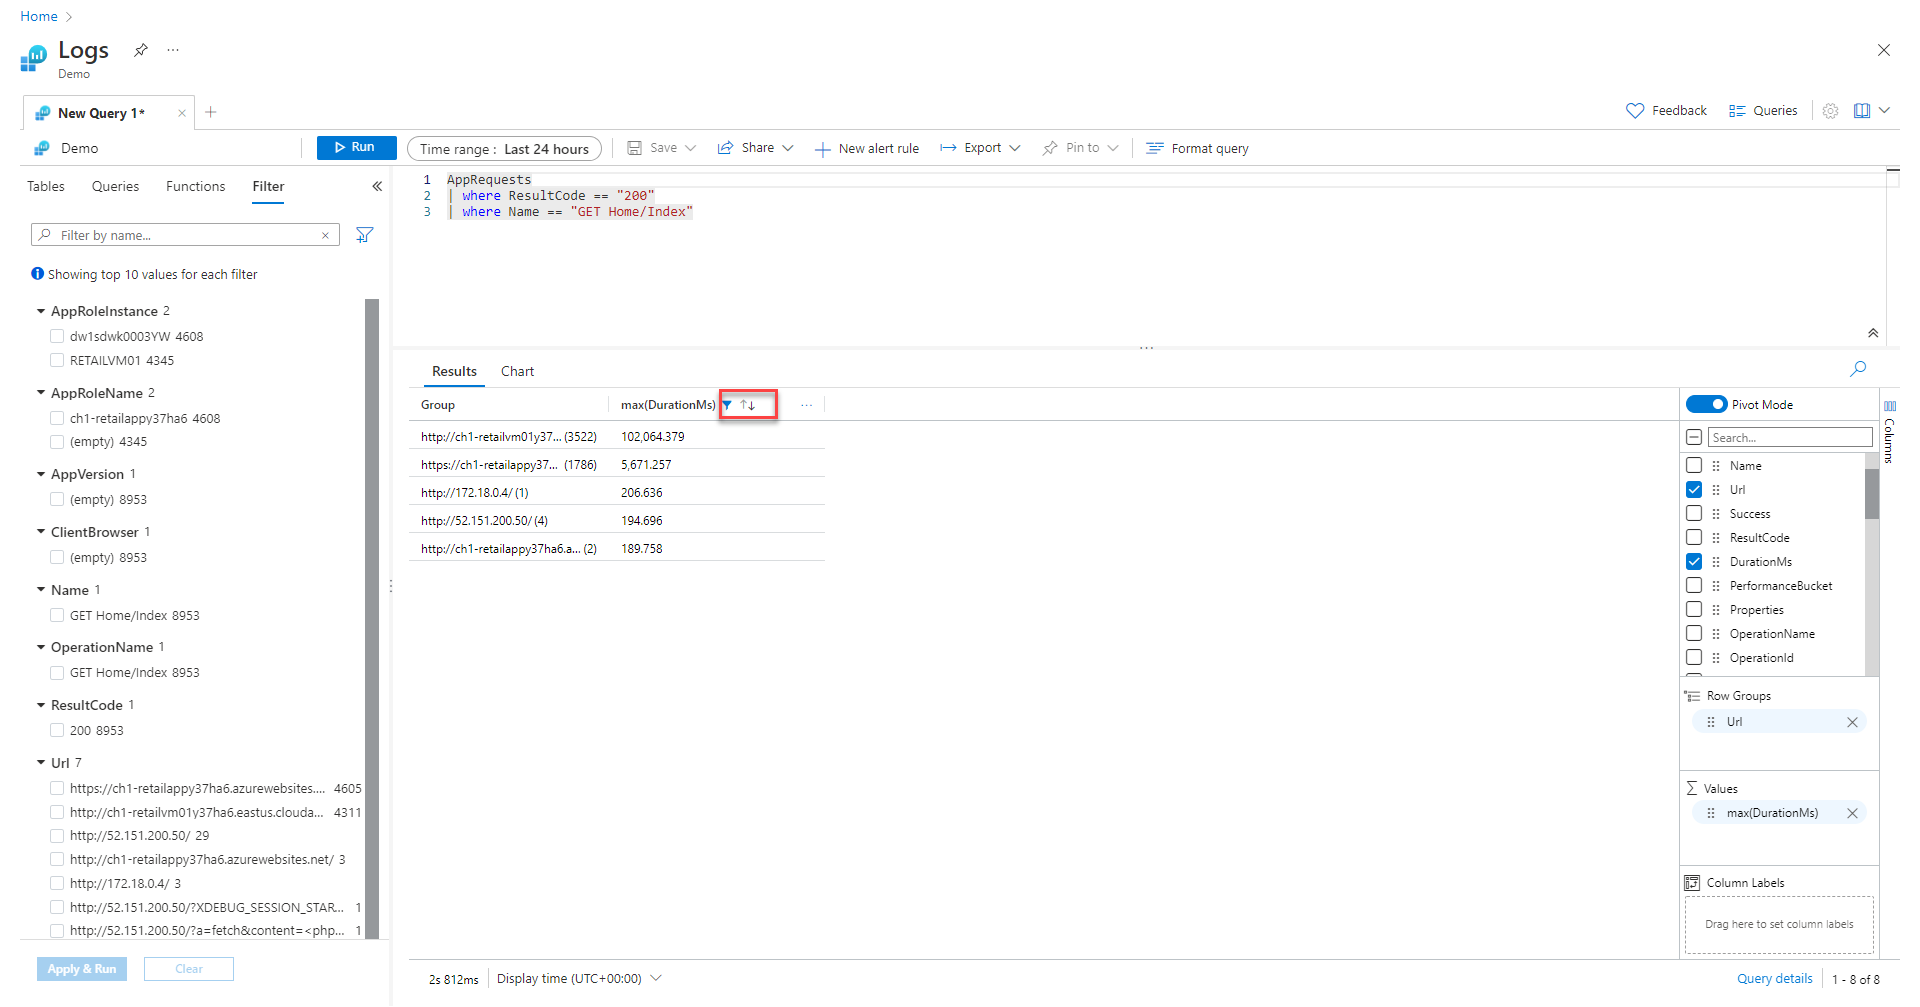 Screenshot the query results pane being sorted by the maximum DurationMS values.